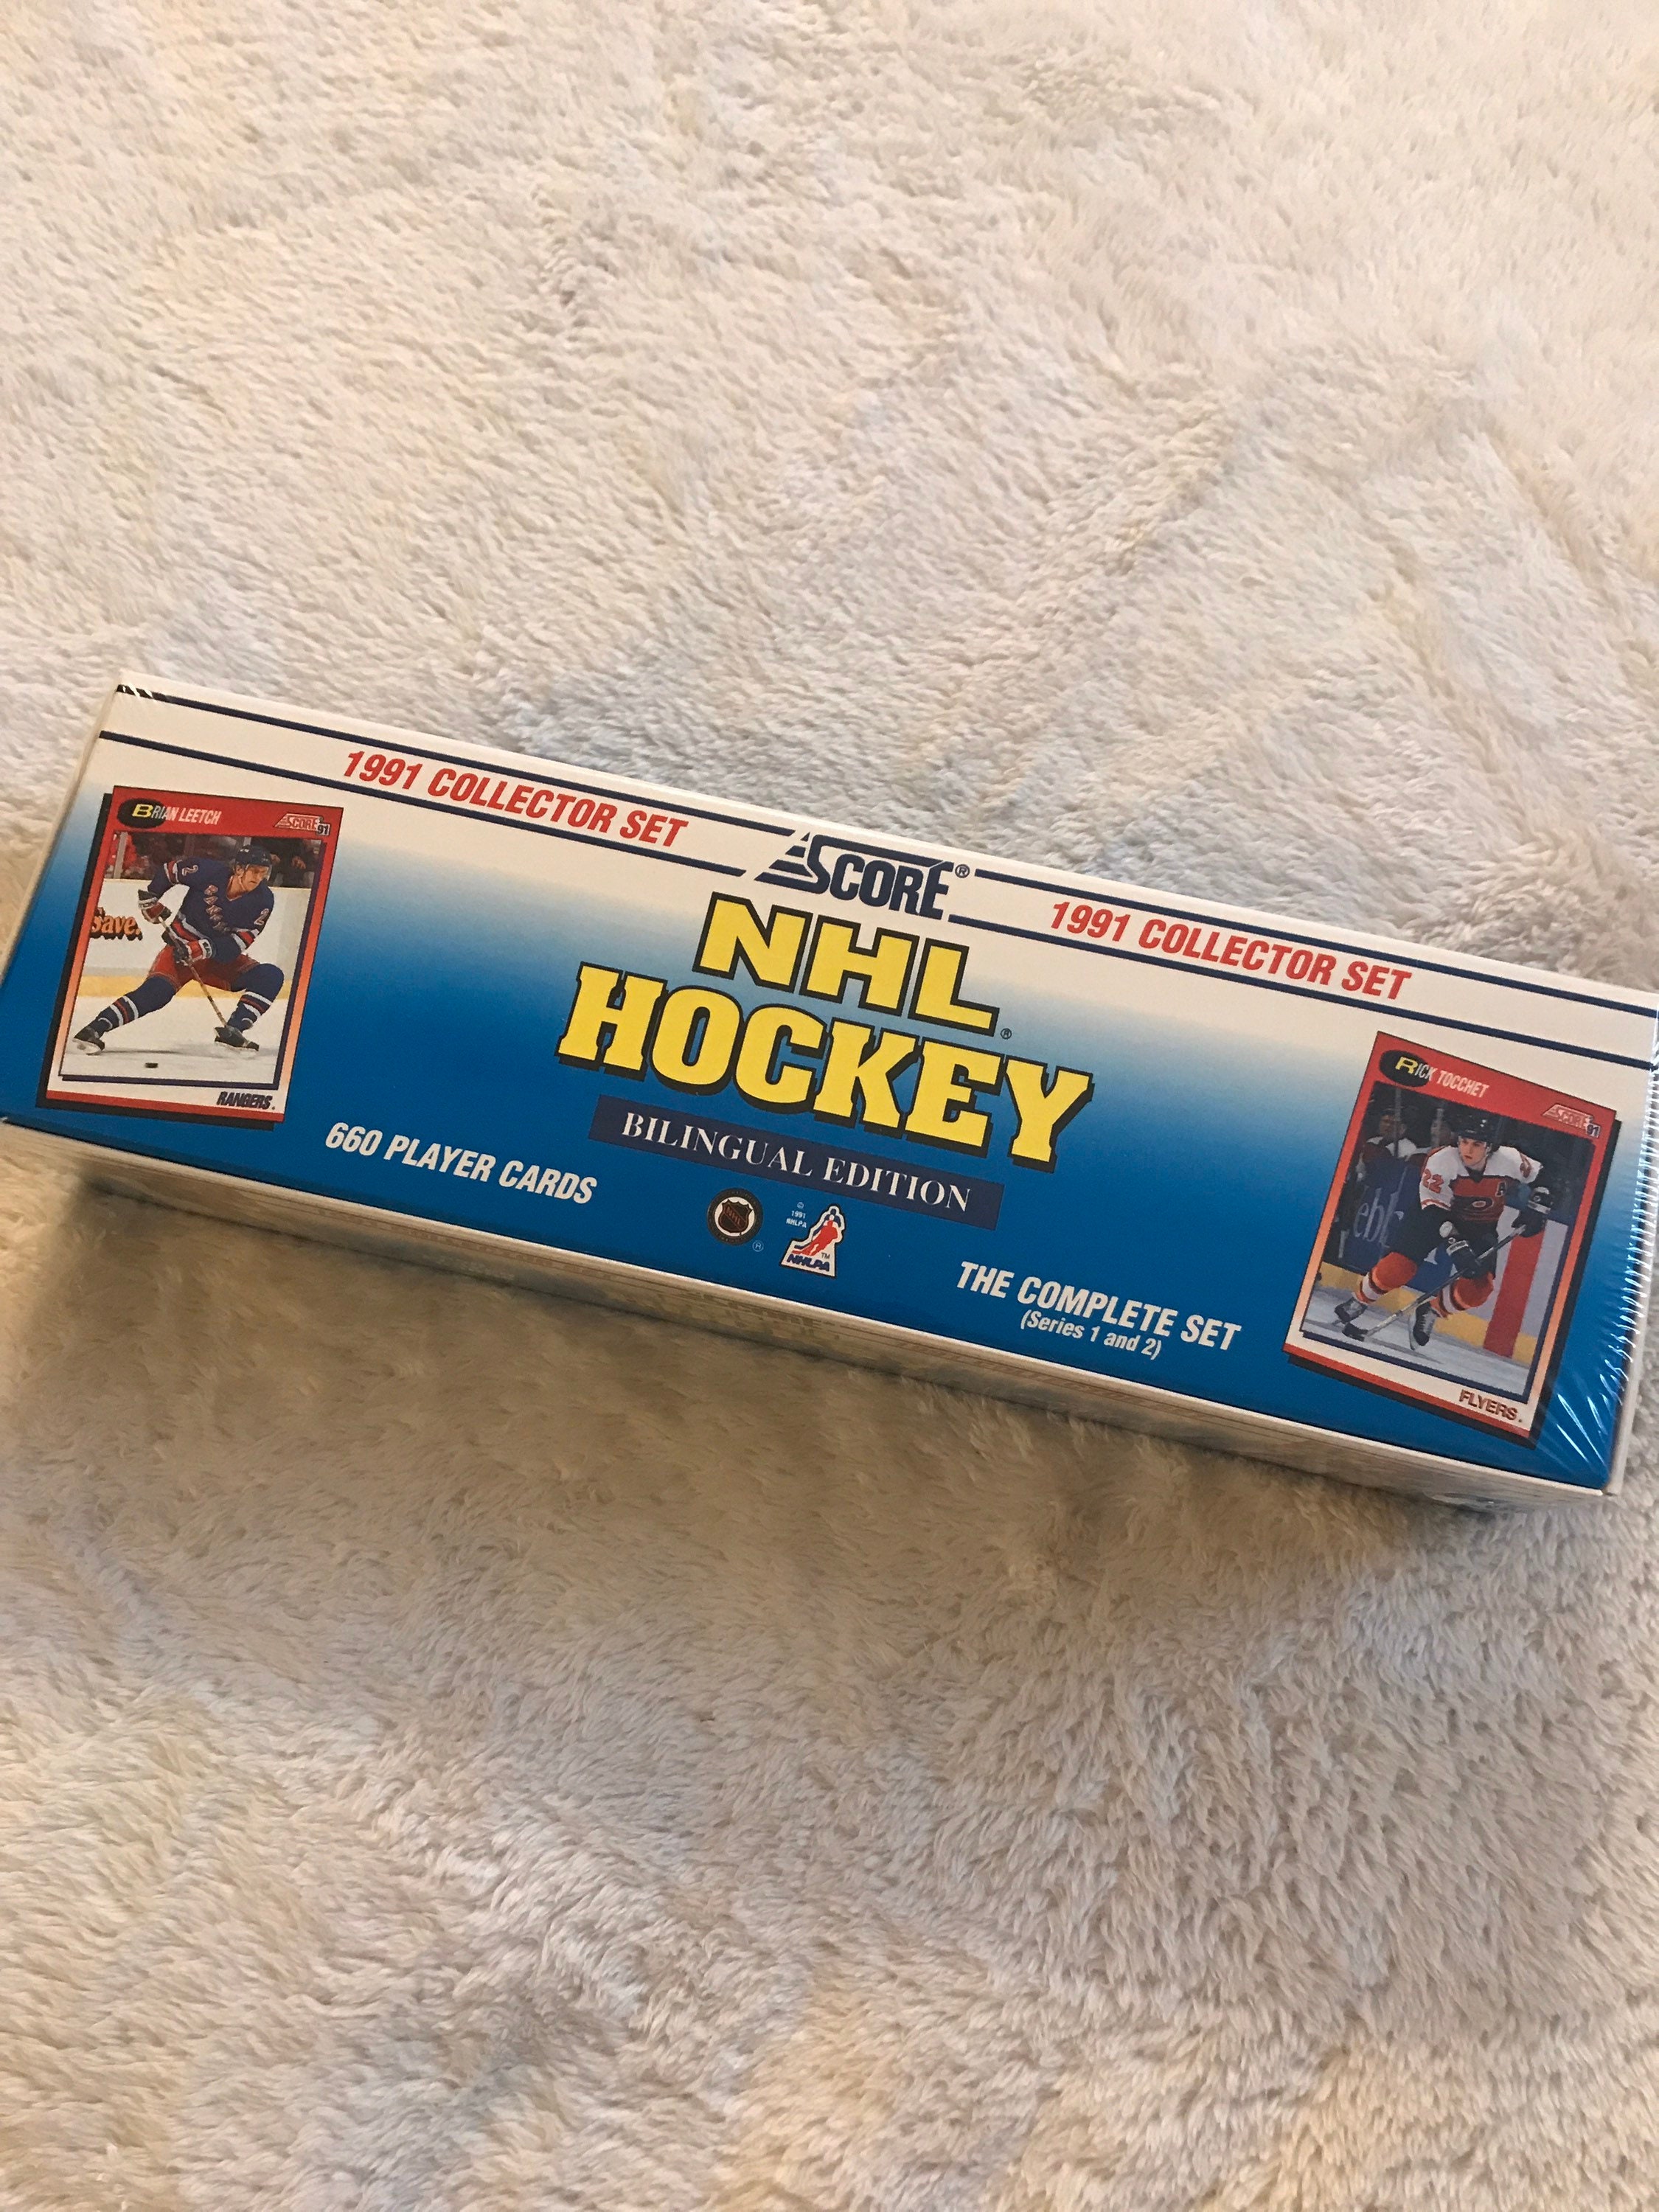 1991 Collector Set - NHL Hockey - Bilingual Edition - Collector Cards